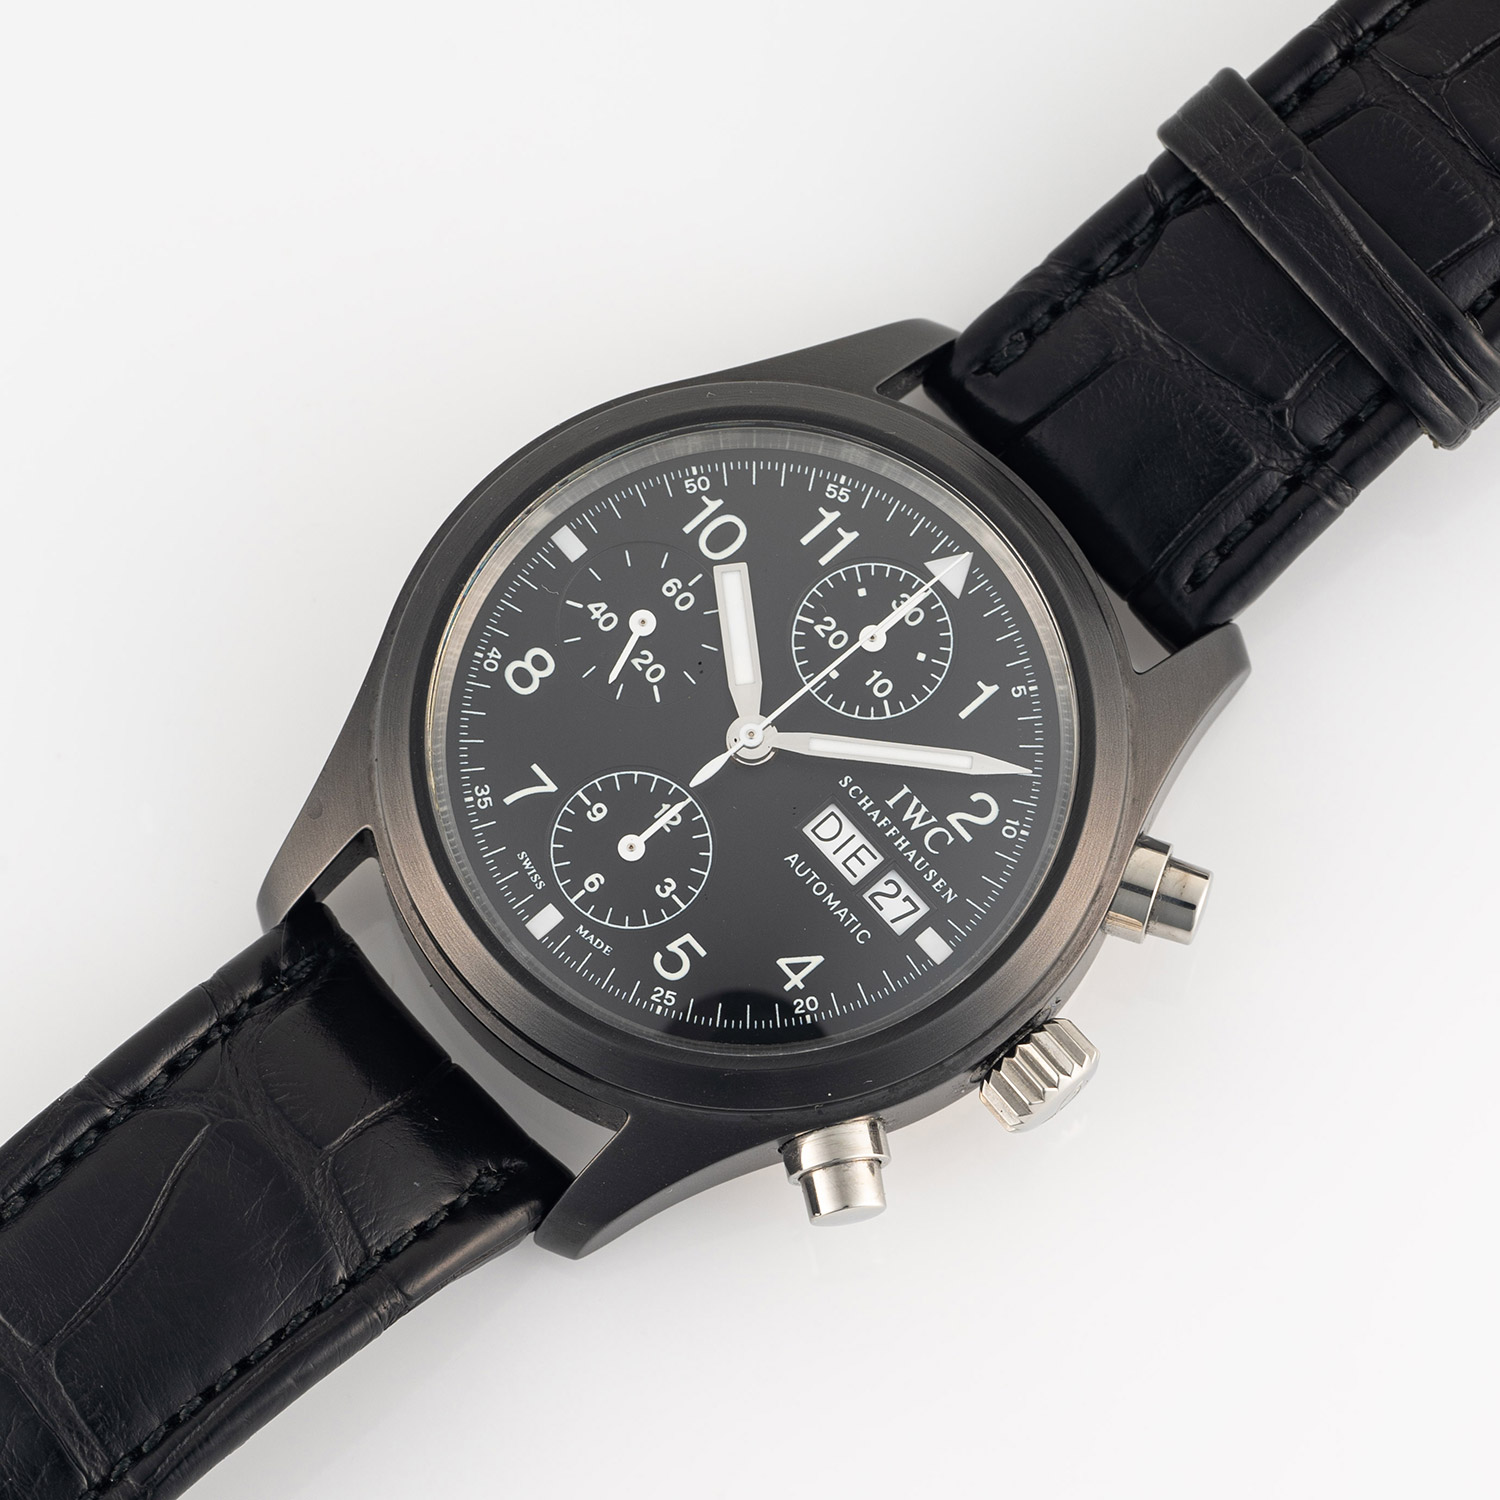 A RARE GENTLEMAN'S CERAMIC IWC FLIEGER CHRONOGRAPH WRIST WATCH DATED 1994, REF. 3705 LESS THAN - Image 3 of 9